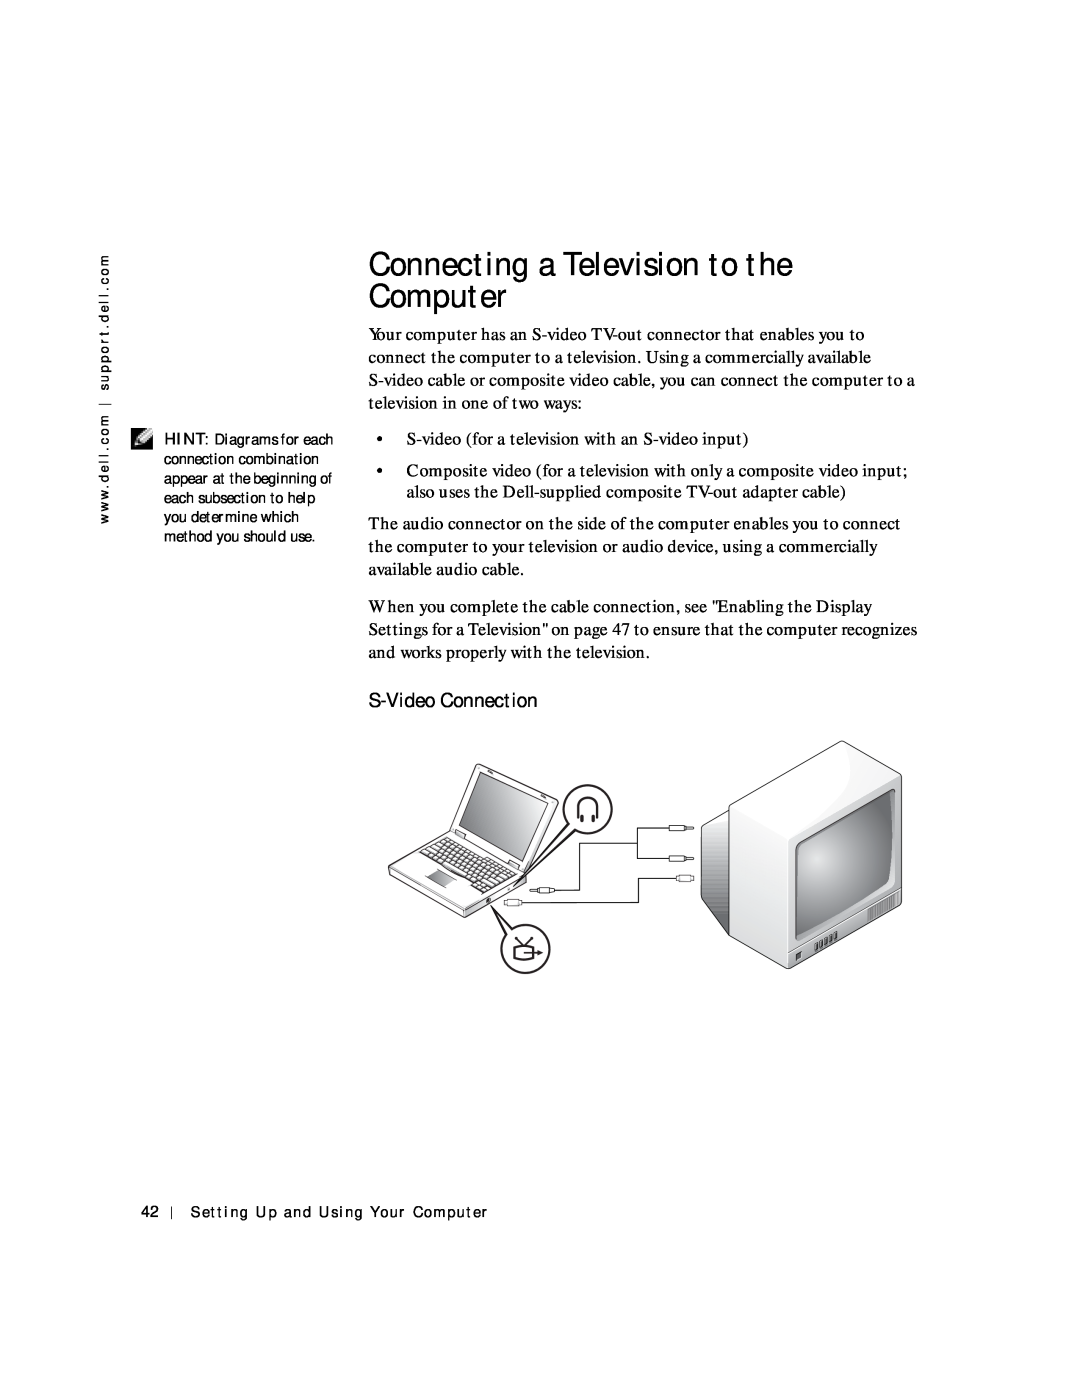 Dell 4150 owner manual Connecting a Television to the Computer, S-Video Connection 